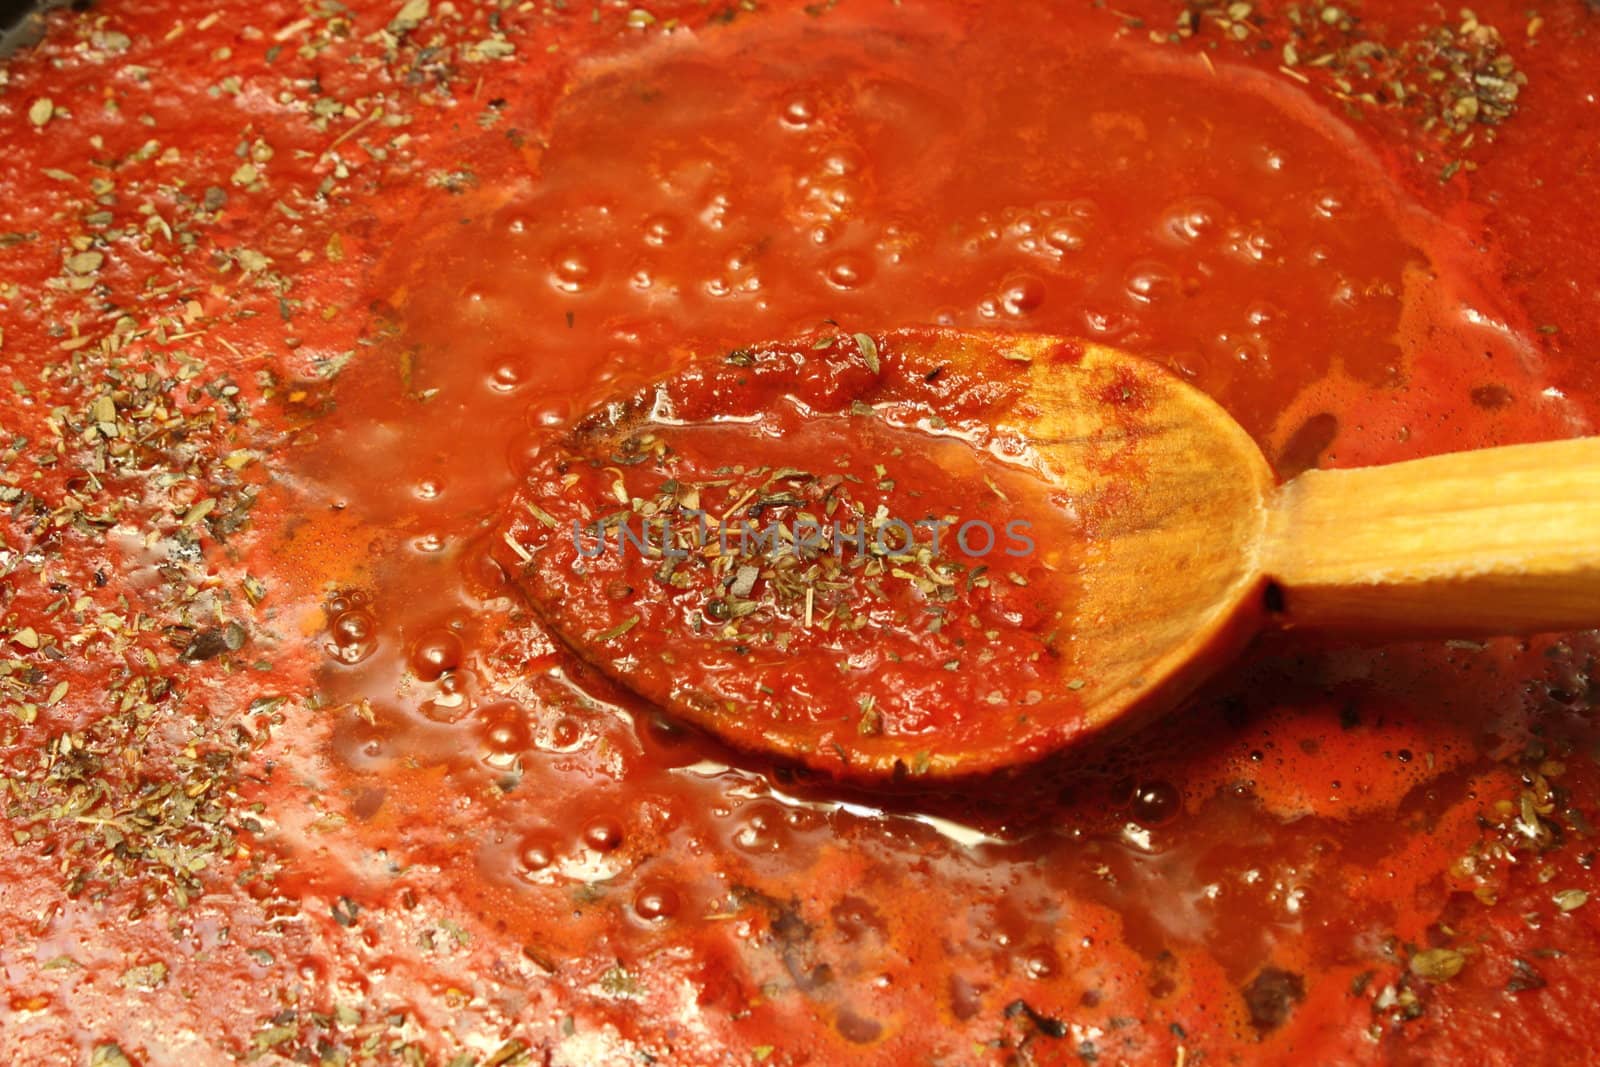 detail of tomato sauce by taviphoto